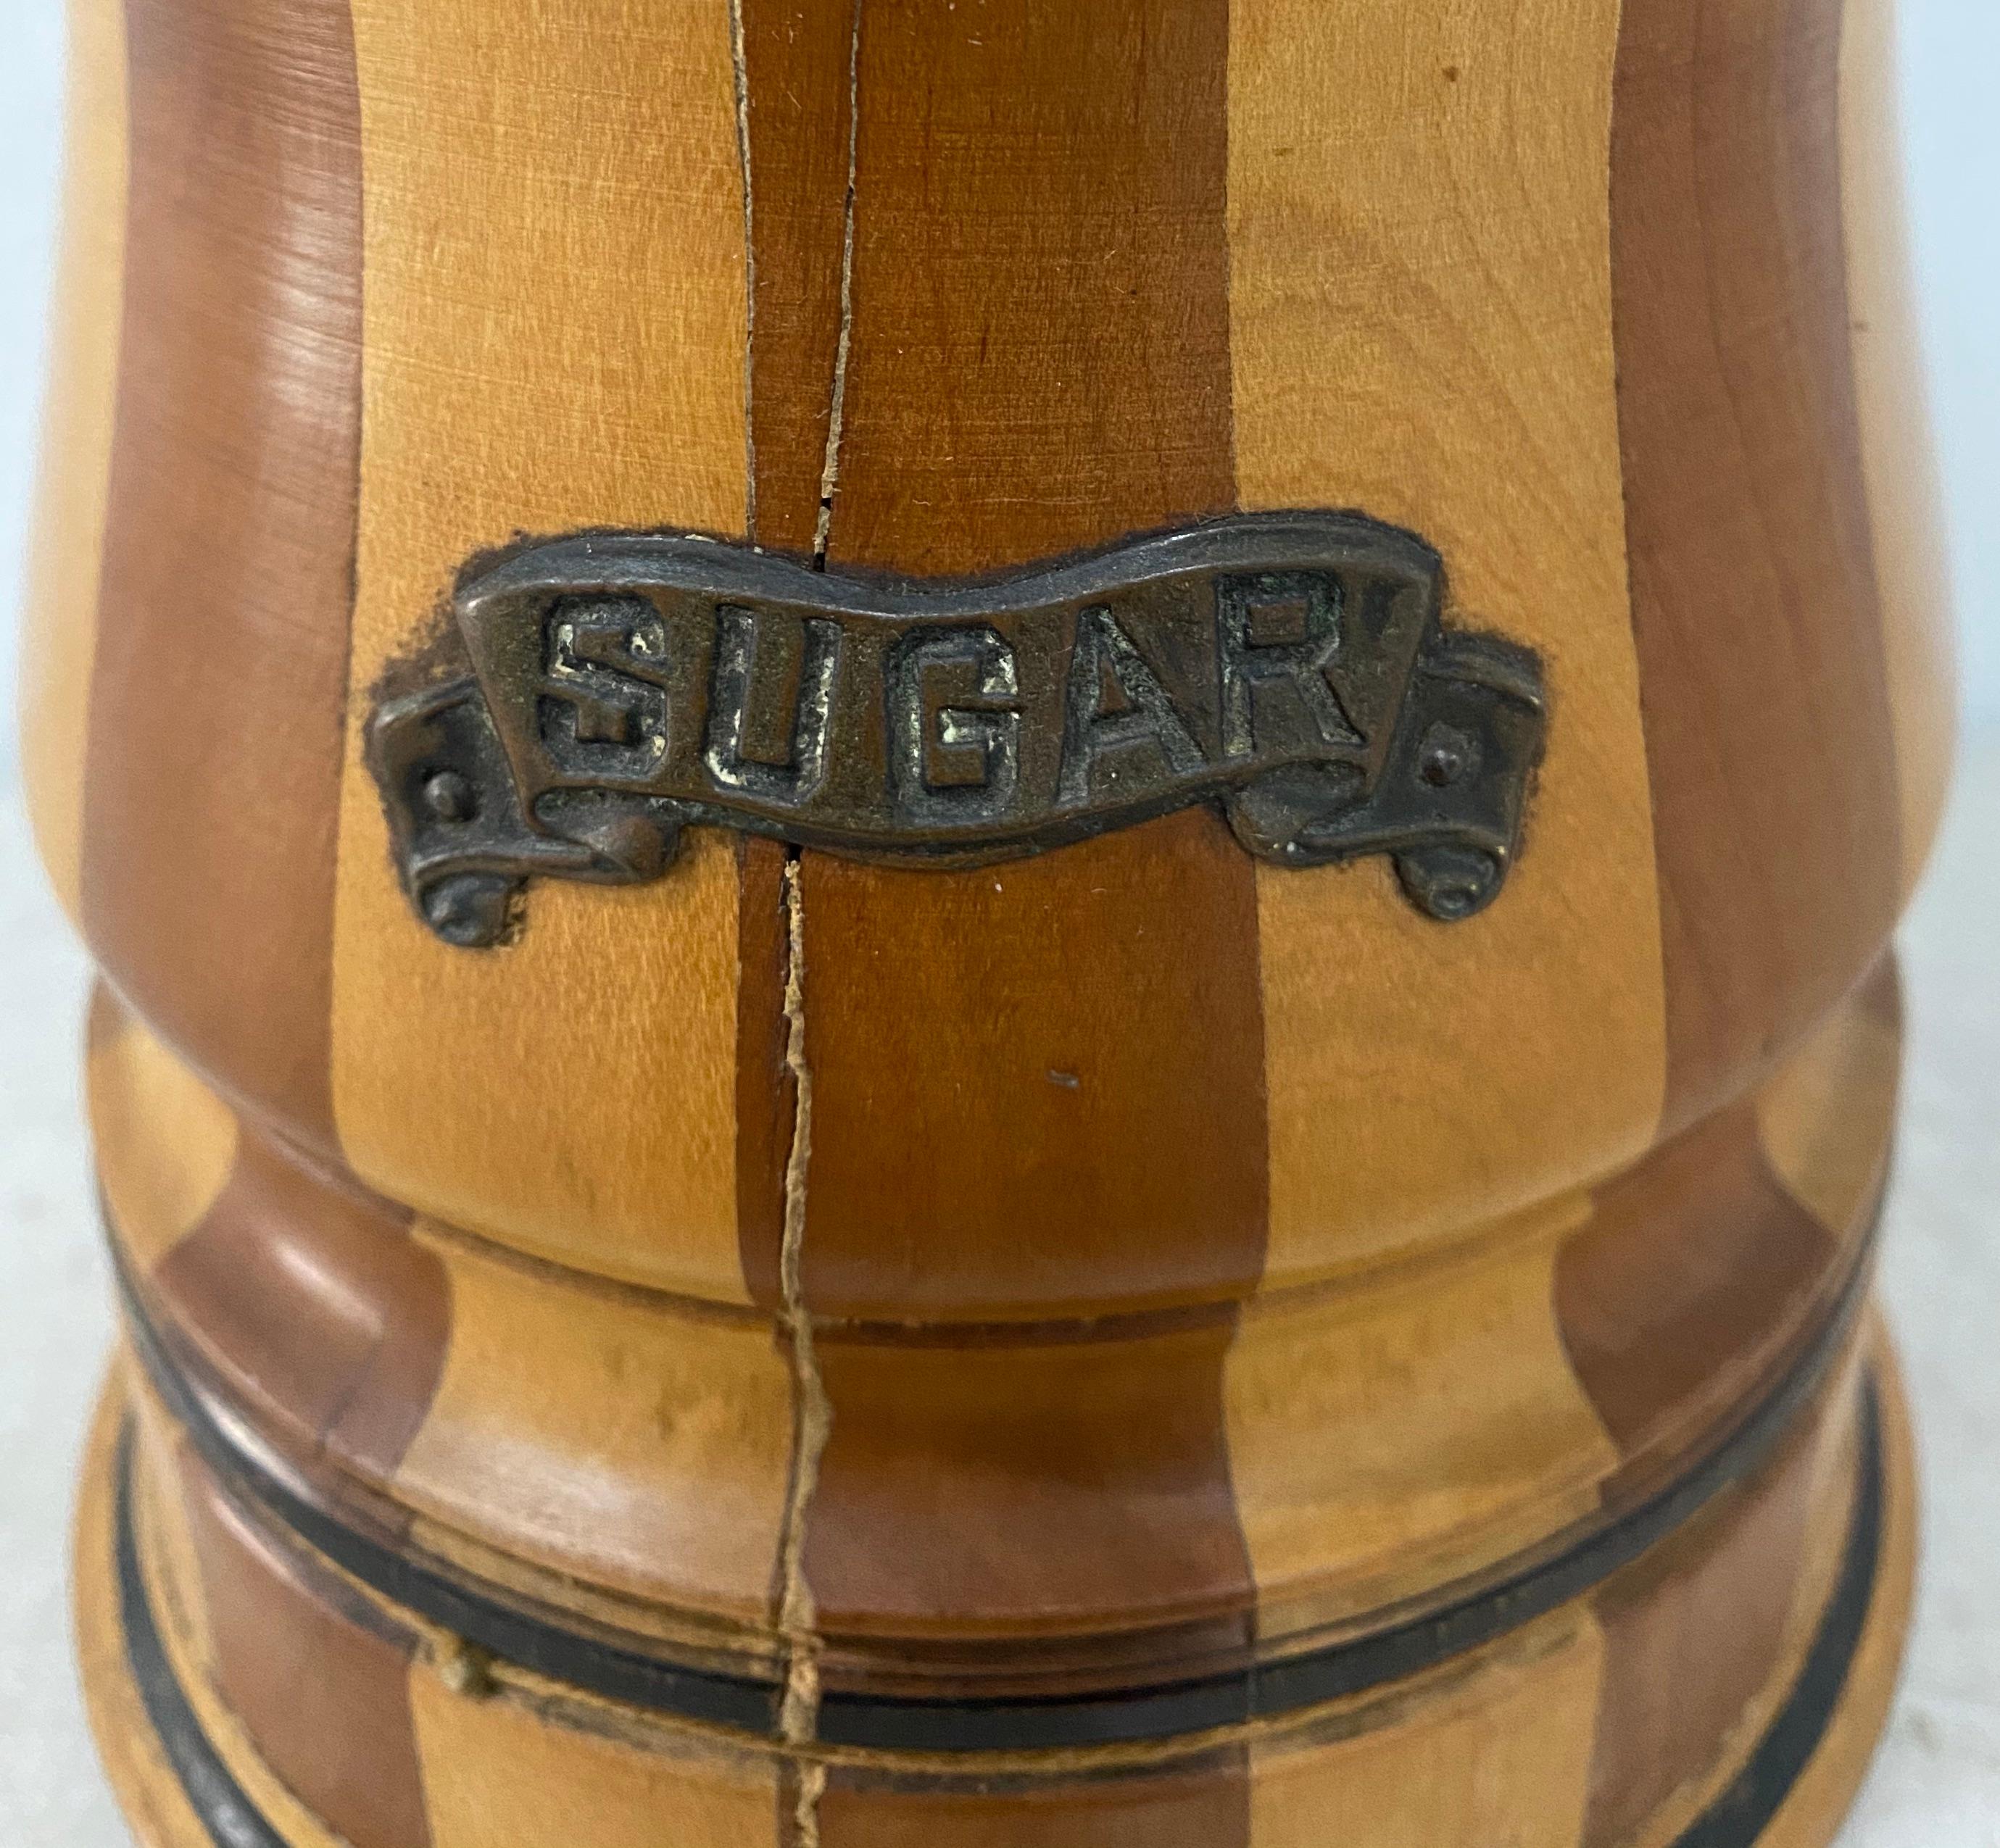 19th century American treenware sugar canister with lid

Dimensions: 5